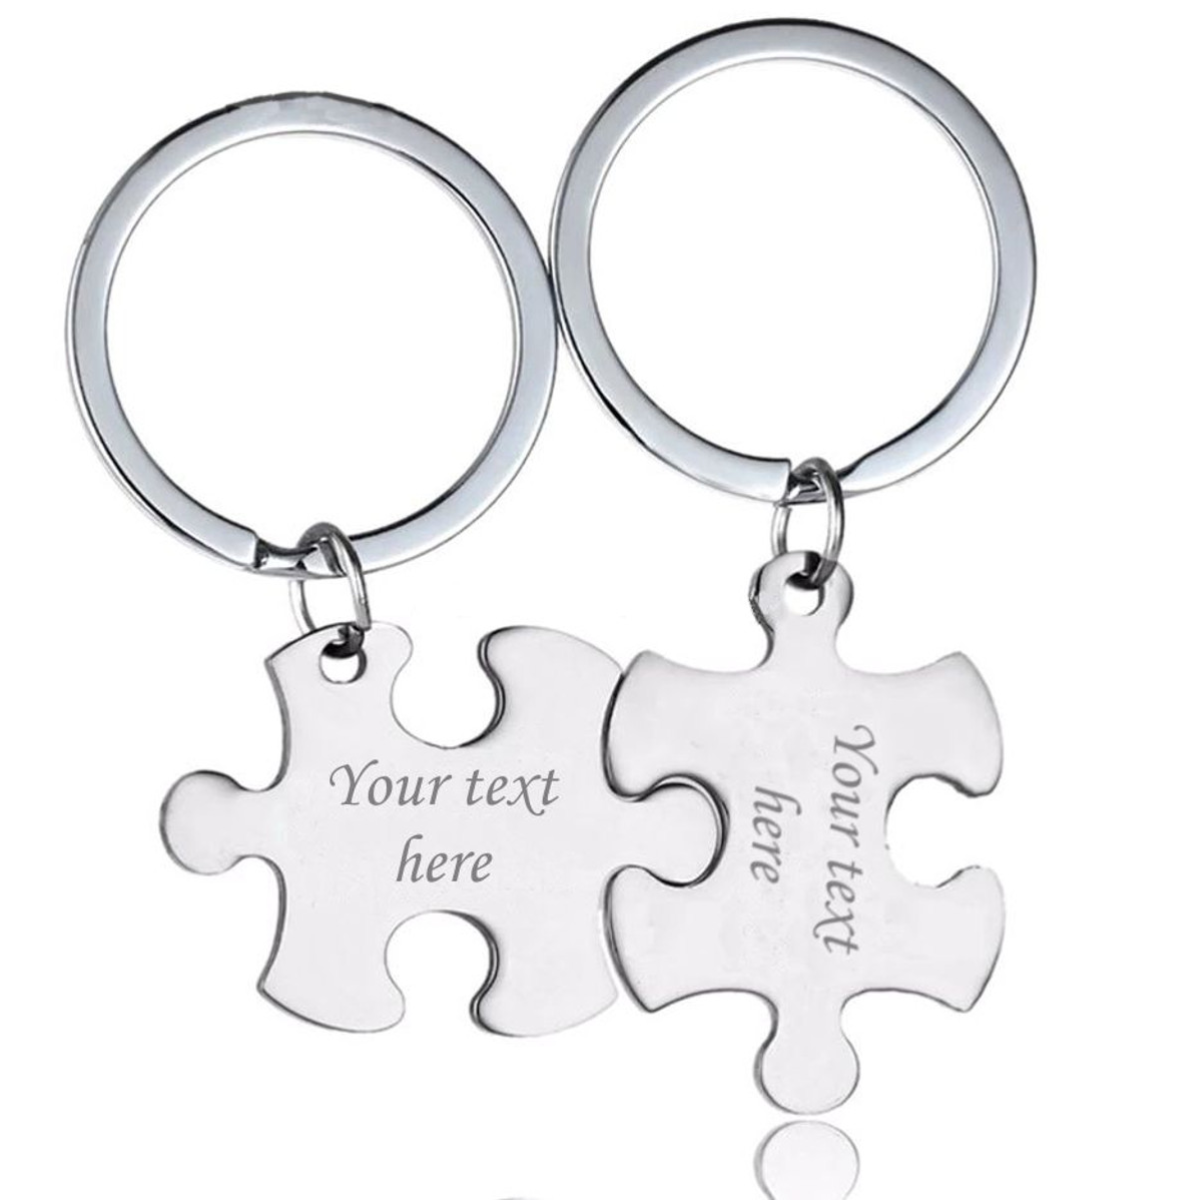 24. Piece Together Your Love: Personalized Puzzle Piece Keychains for Memorable Anniversary Gifts